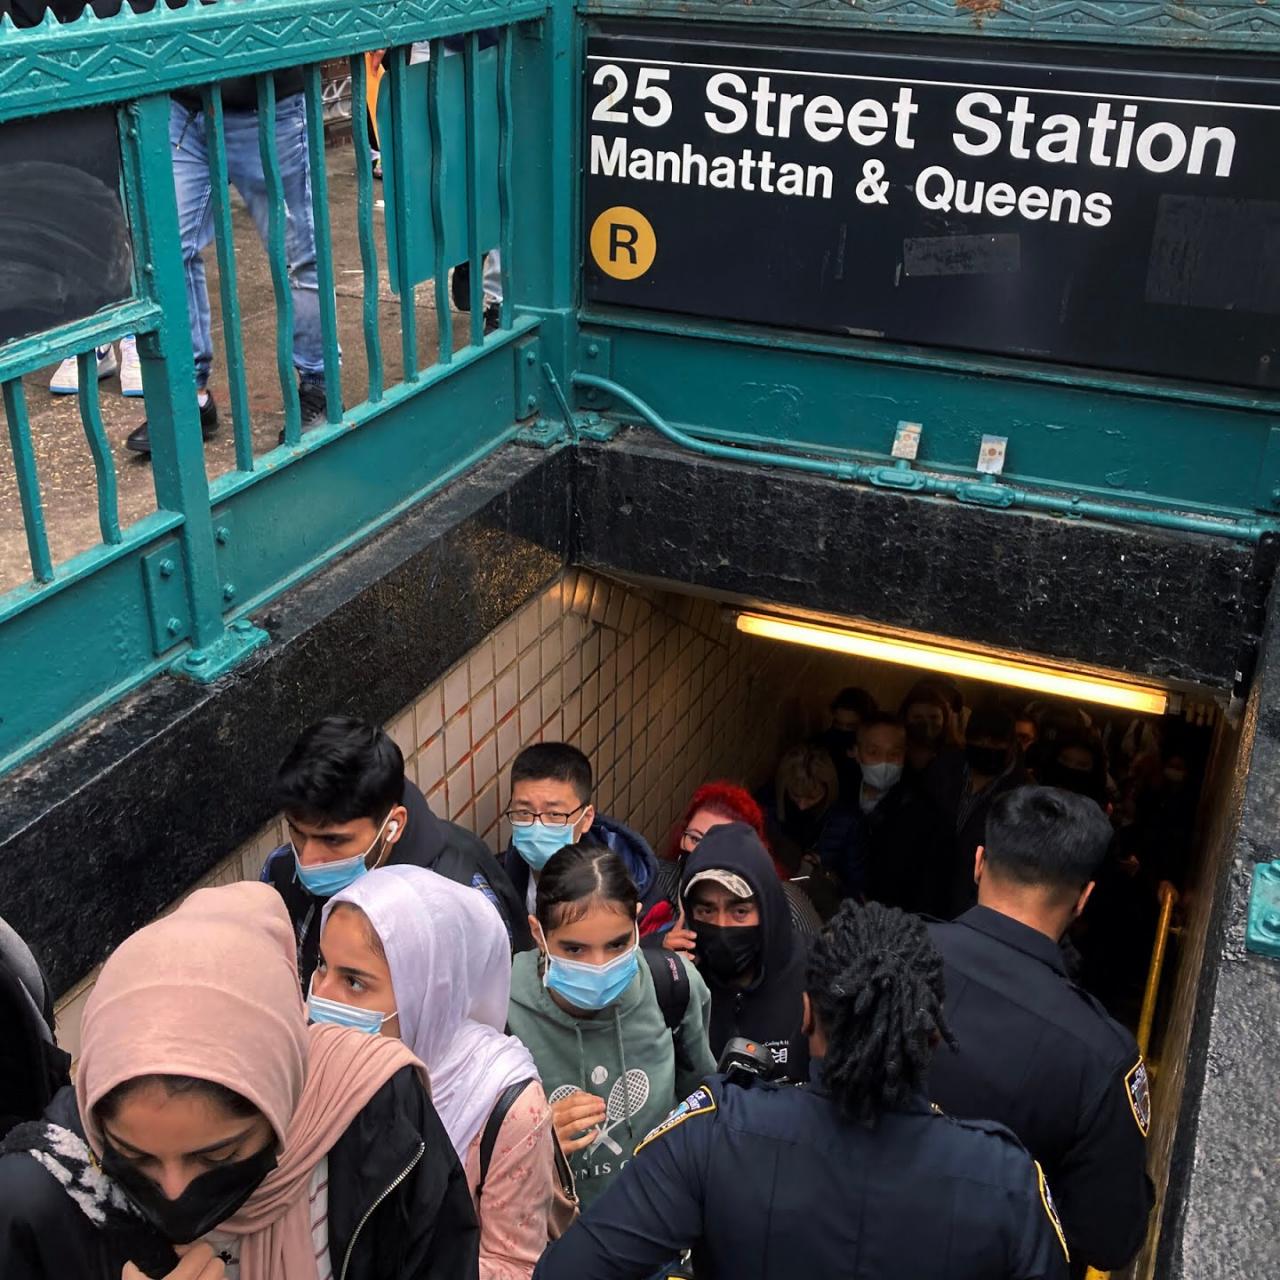 Update: 10 shot, 6 others injured in attack on Brooklyn Subway Station